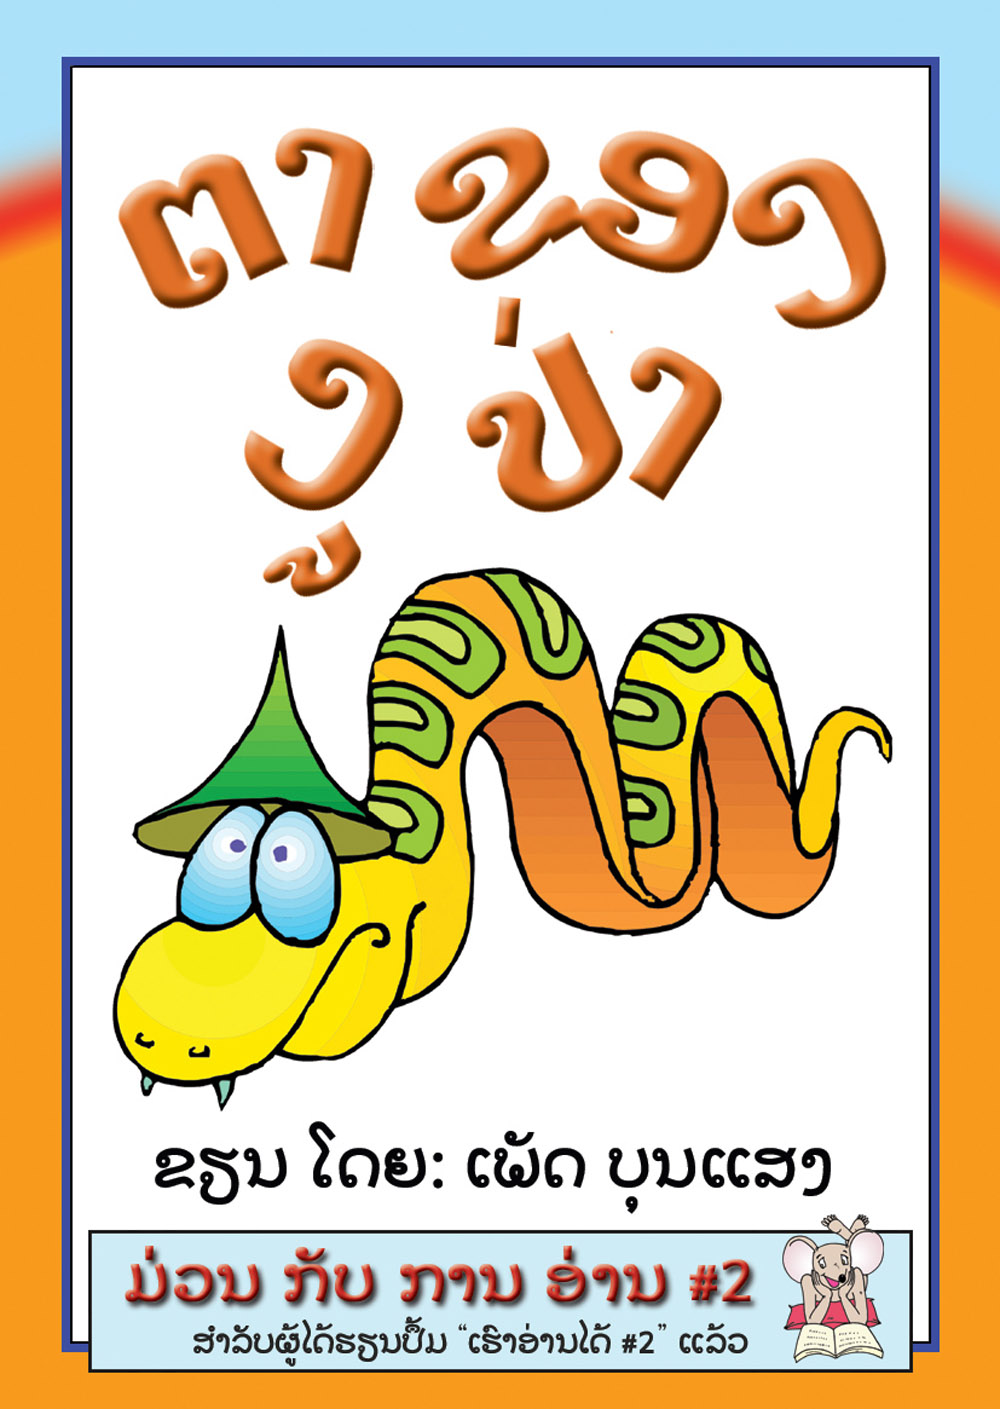 The Crazy Snake's Eyes large book cover, published in Lao language